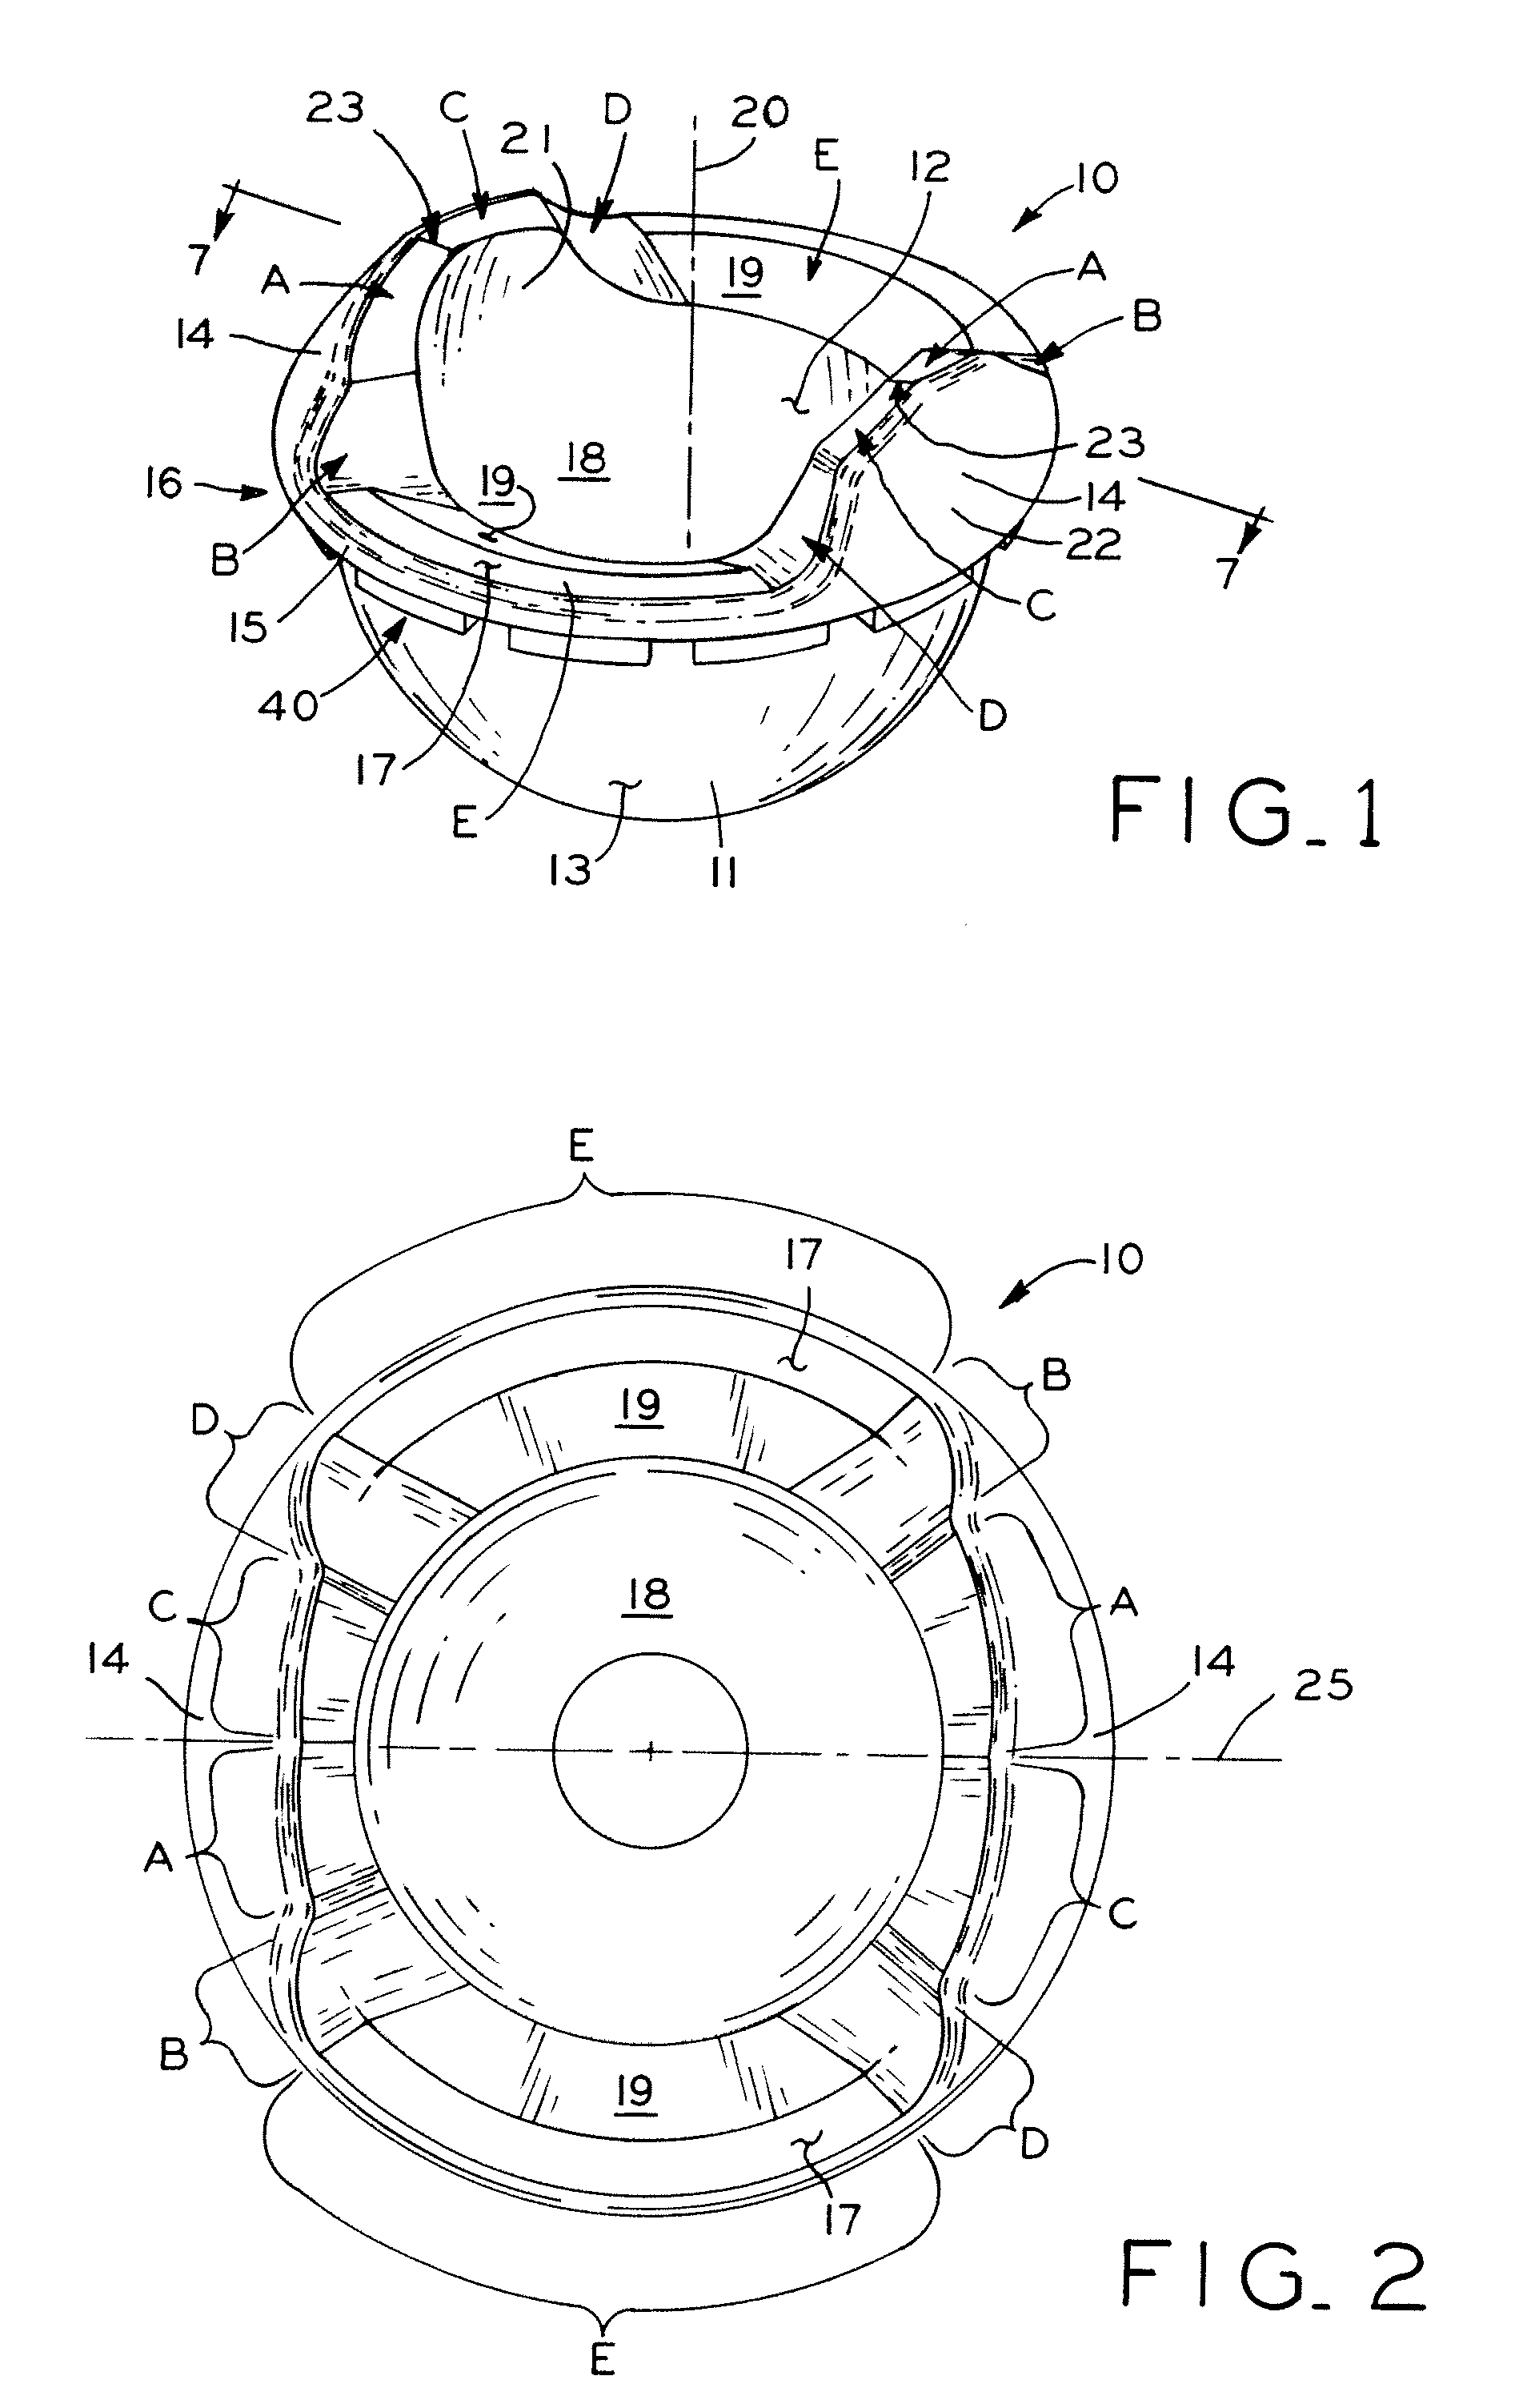 Rotating constrained liner